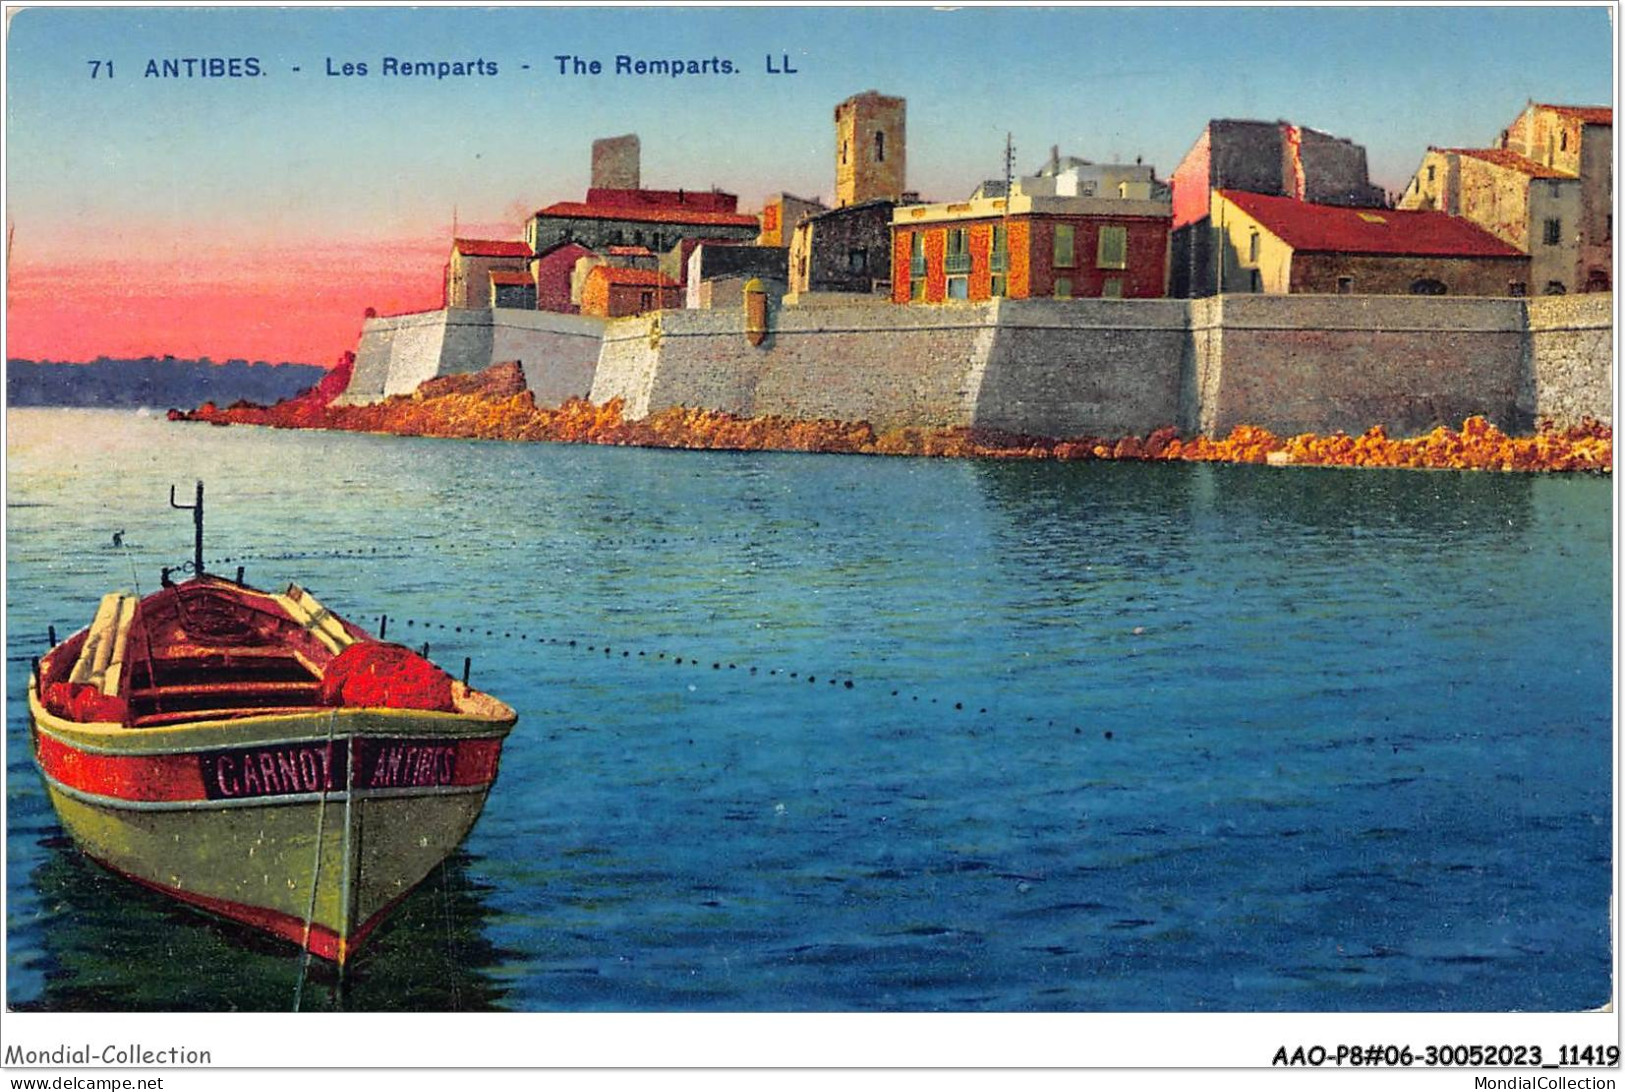 AAOP8-06-0664 - ANTIBES - Les Remparts - Antibes - Les Remparts